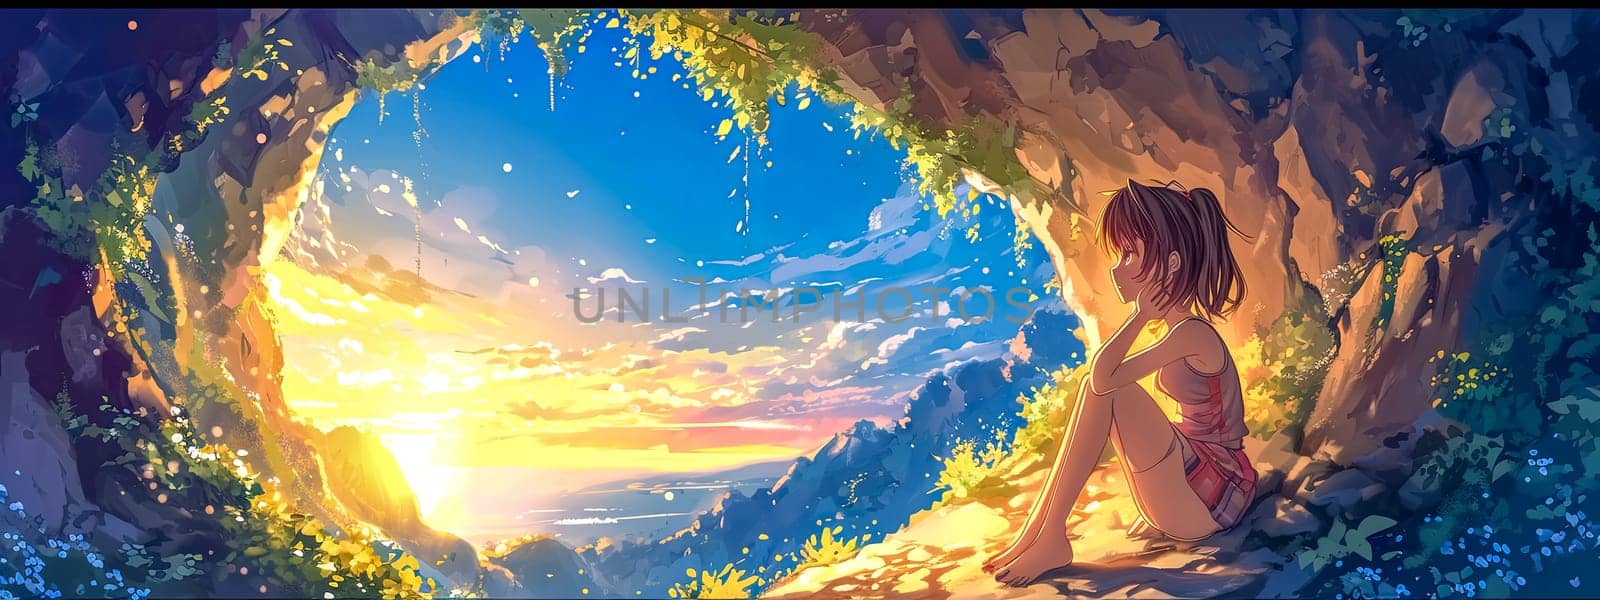 young girl sitting at the entrance of a cave, gazing out at a serene sunset that blankets the landscape and sea in a warm golden light, nature and drifting clouds enhancing the peaceful atmosphere